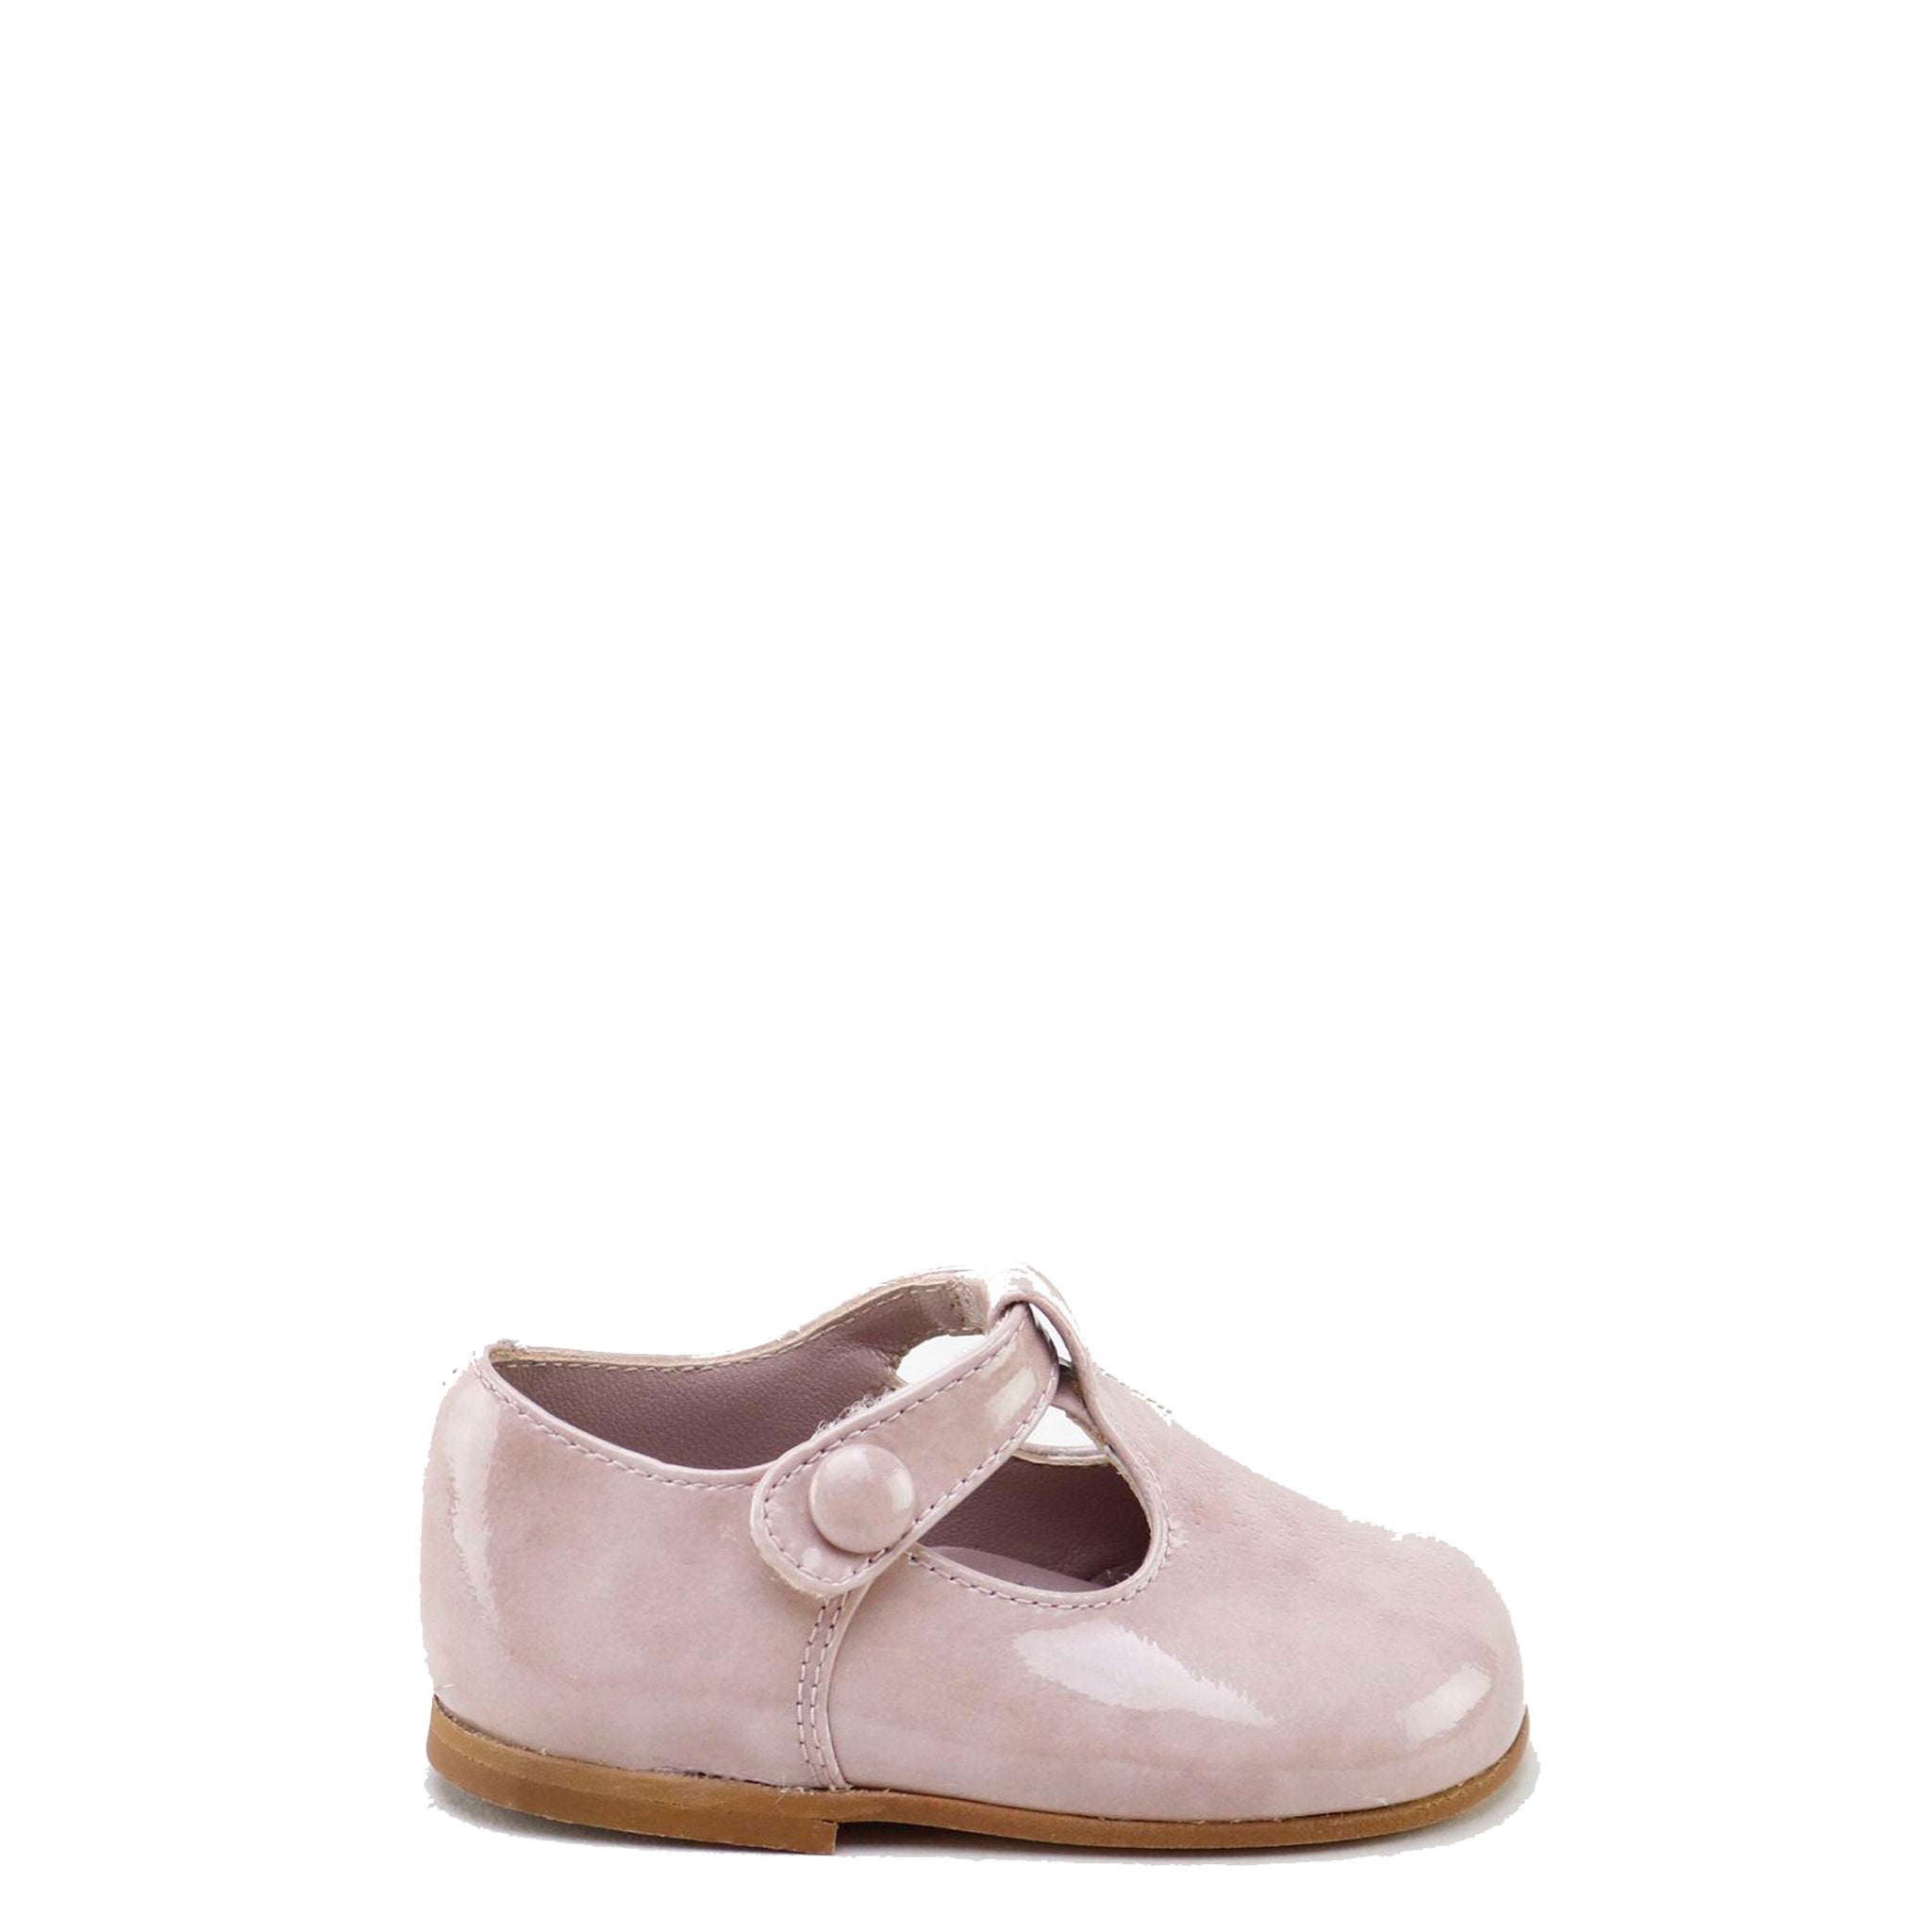 Smoky Pink Patent T-Strap Baby Shoe - Tassel Children Shoes